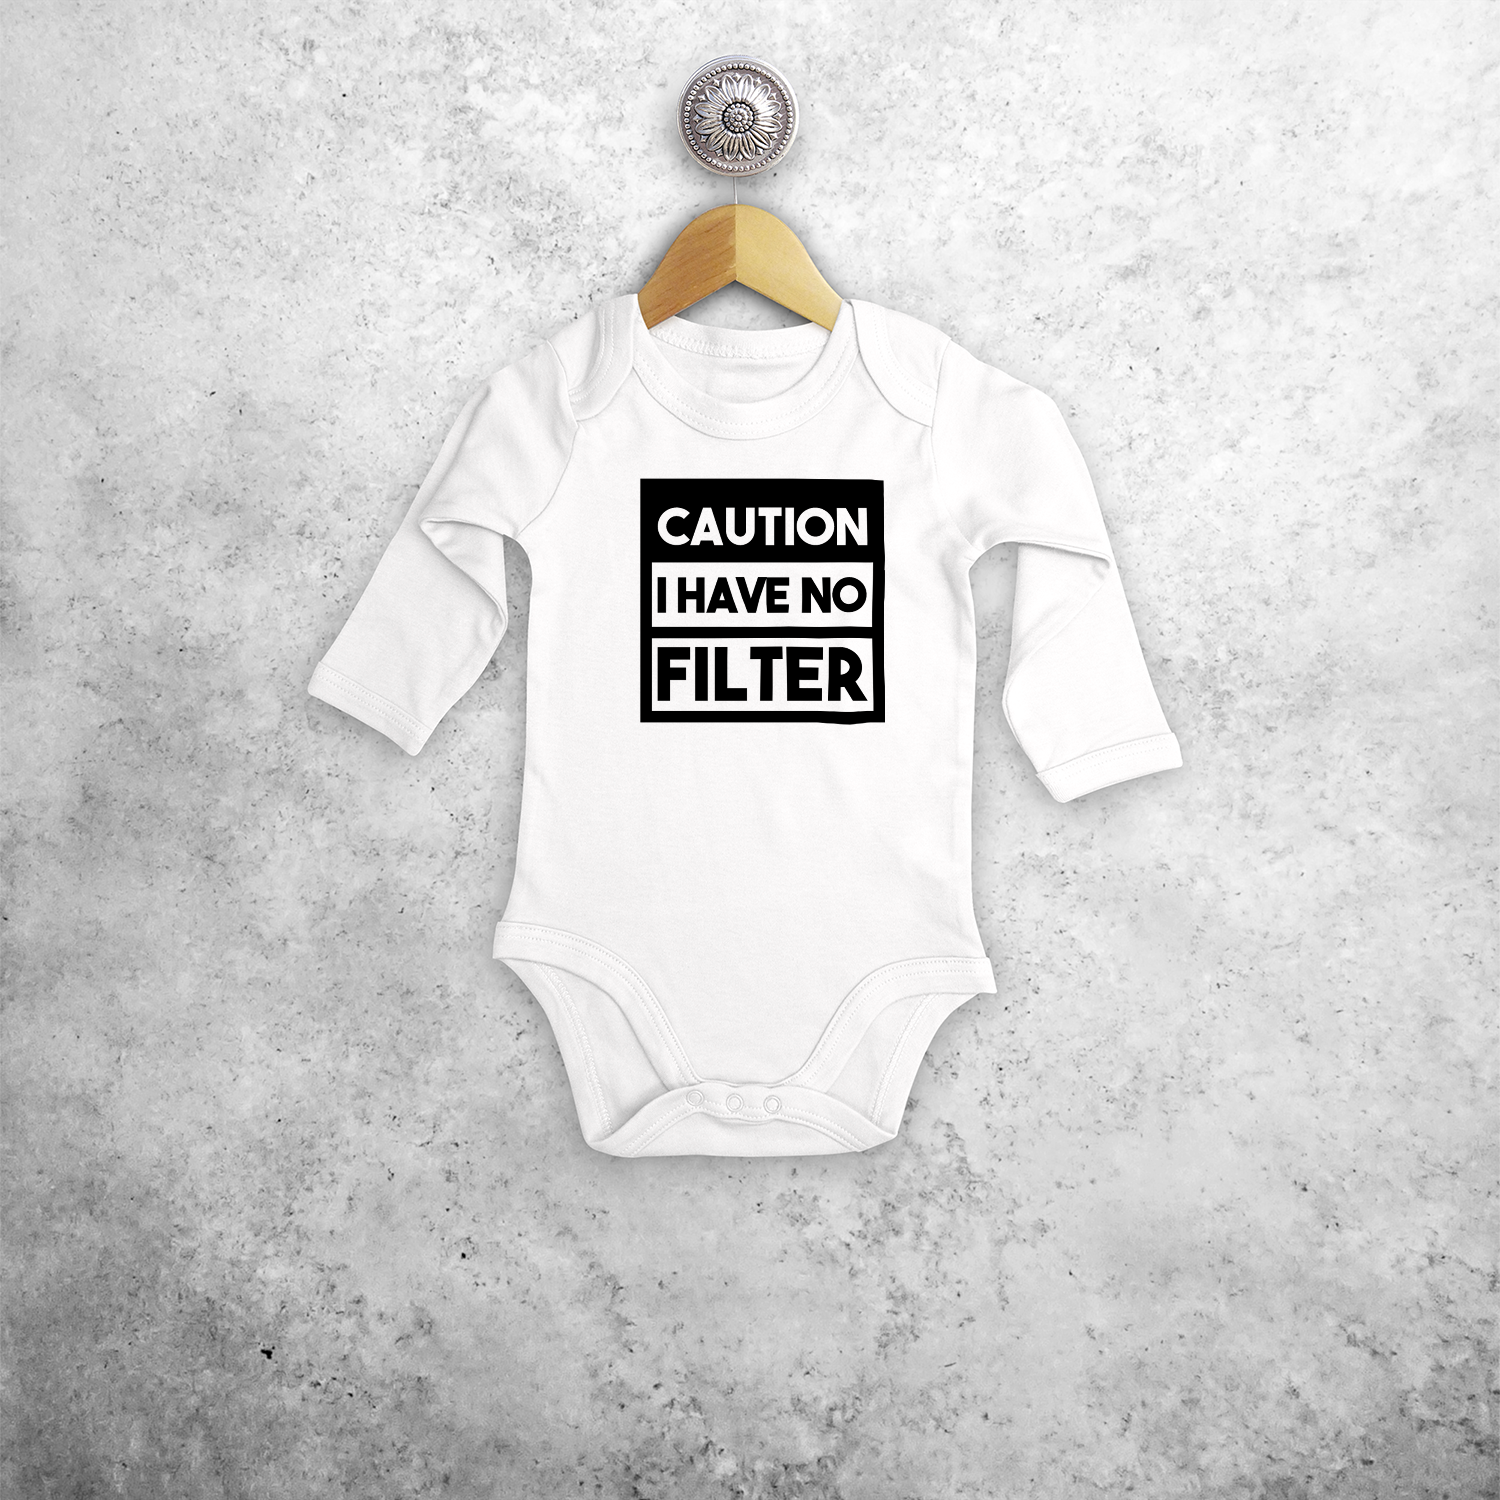 'Caution: I have no filter' baby longsleeve bodysuit